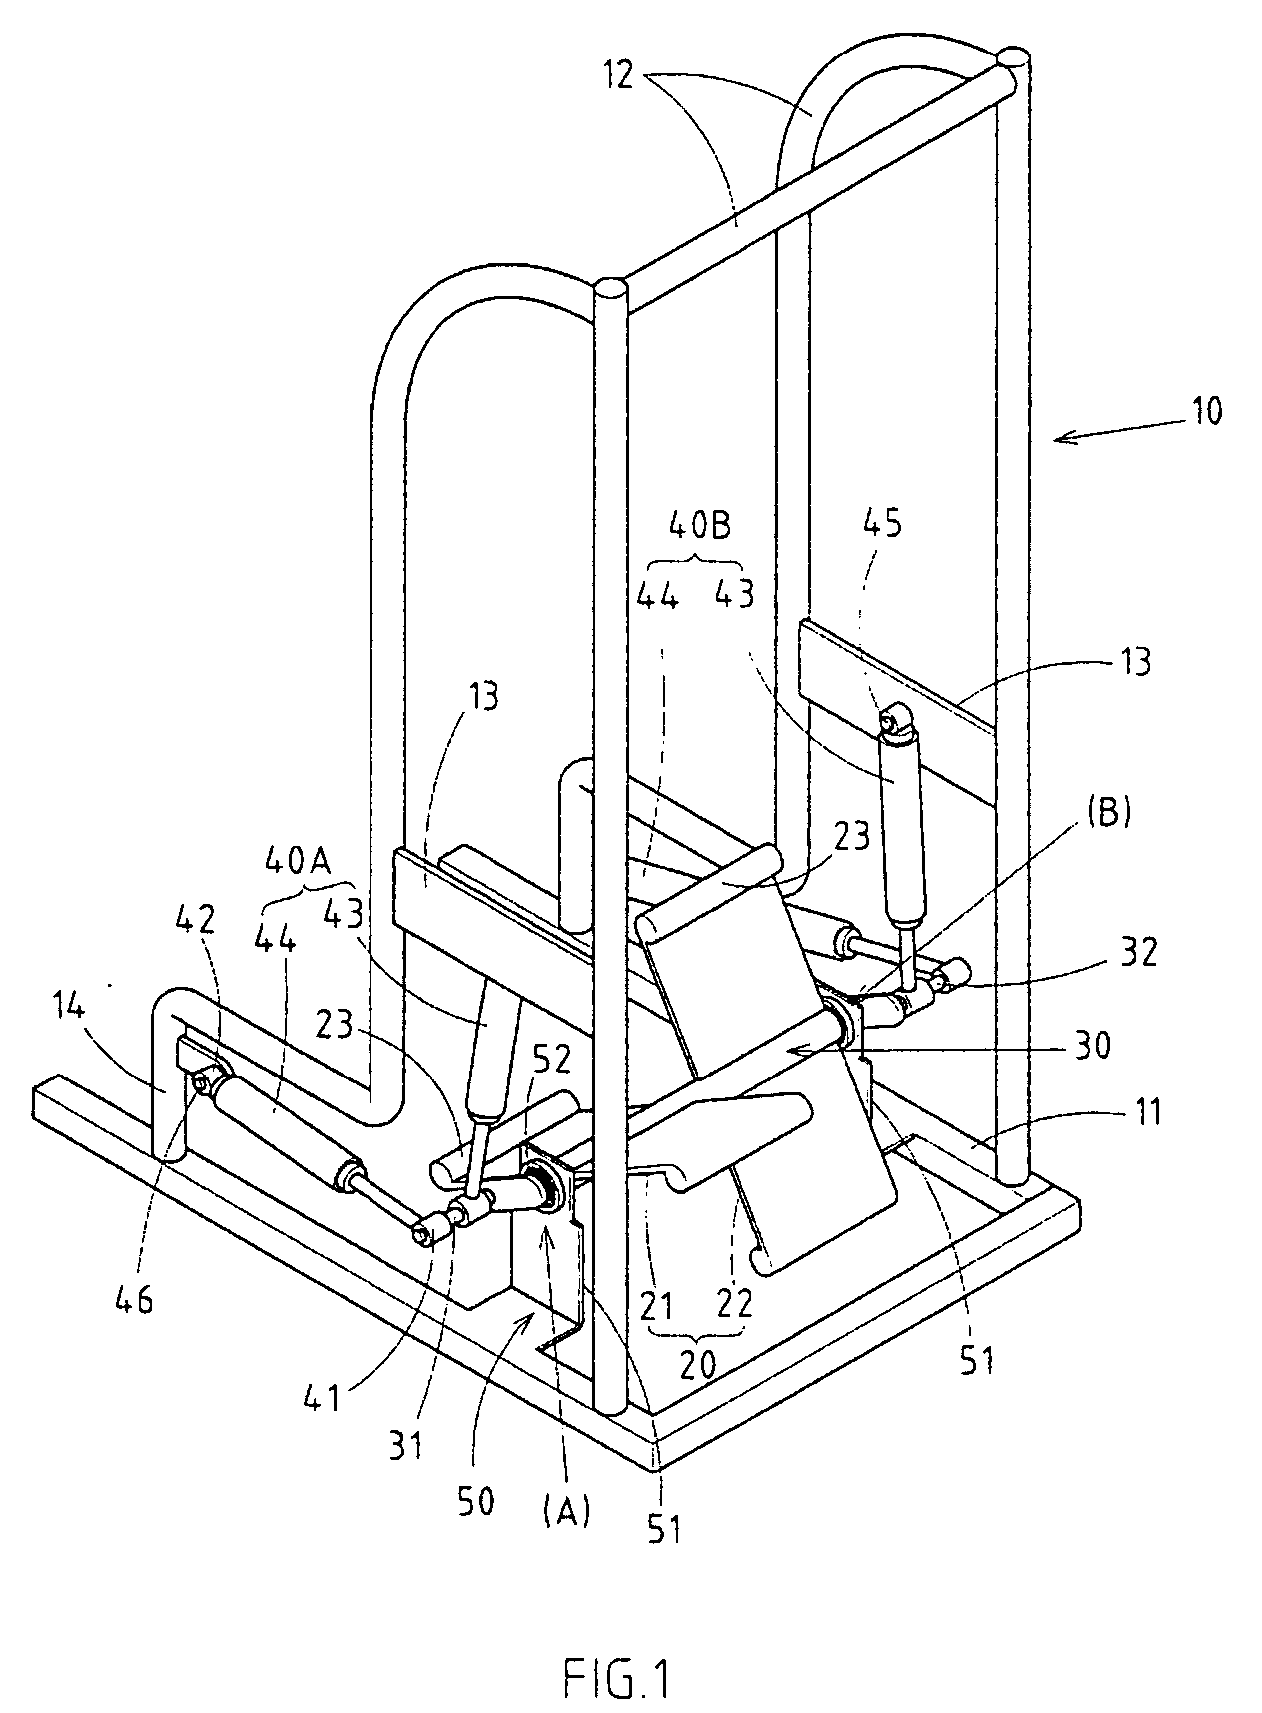 Stationary apparatus for doing exercise imitating the act of mountain climbing